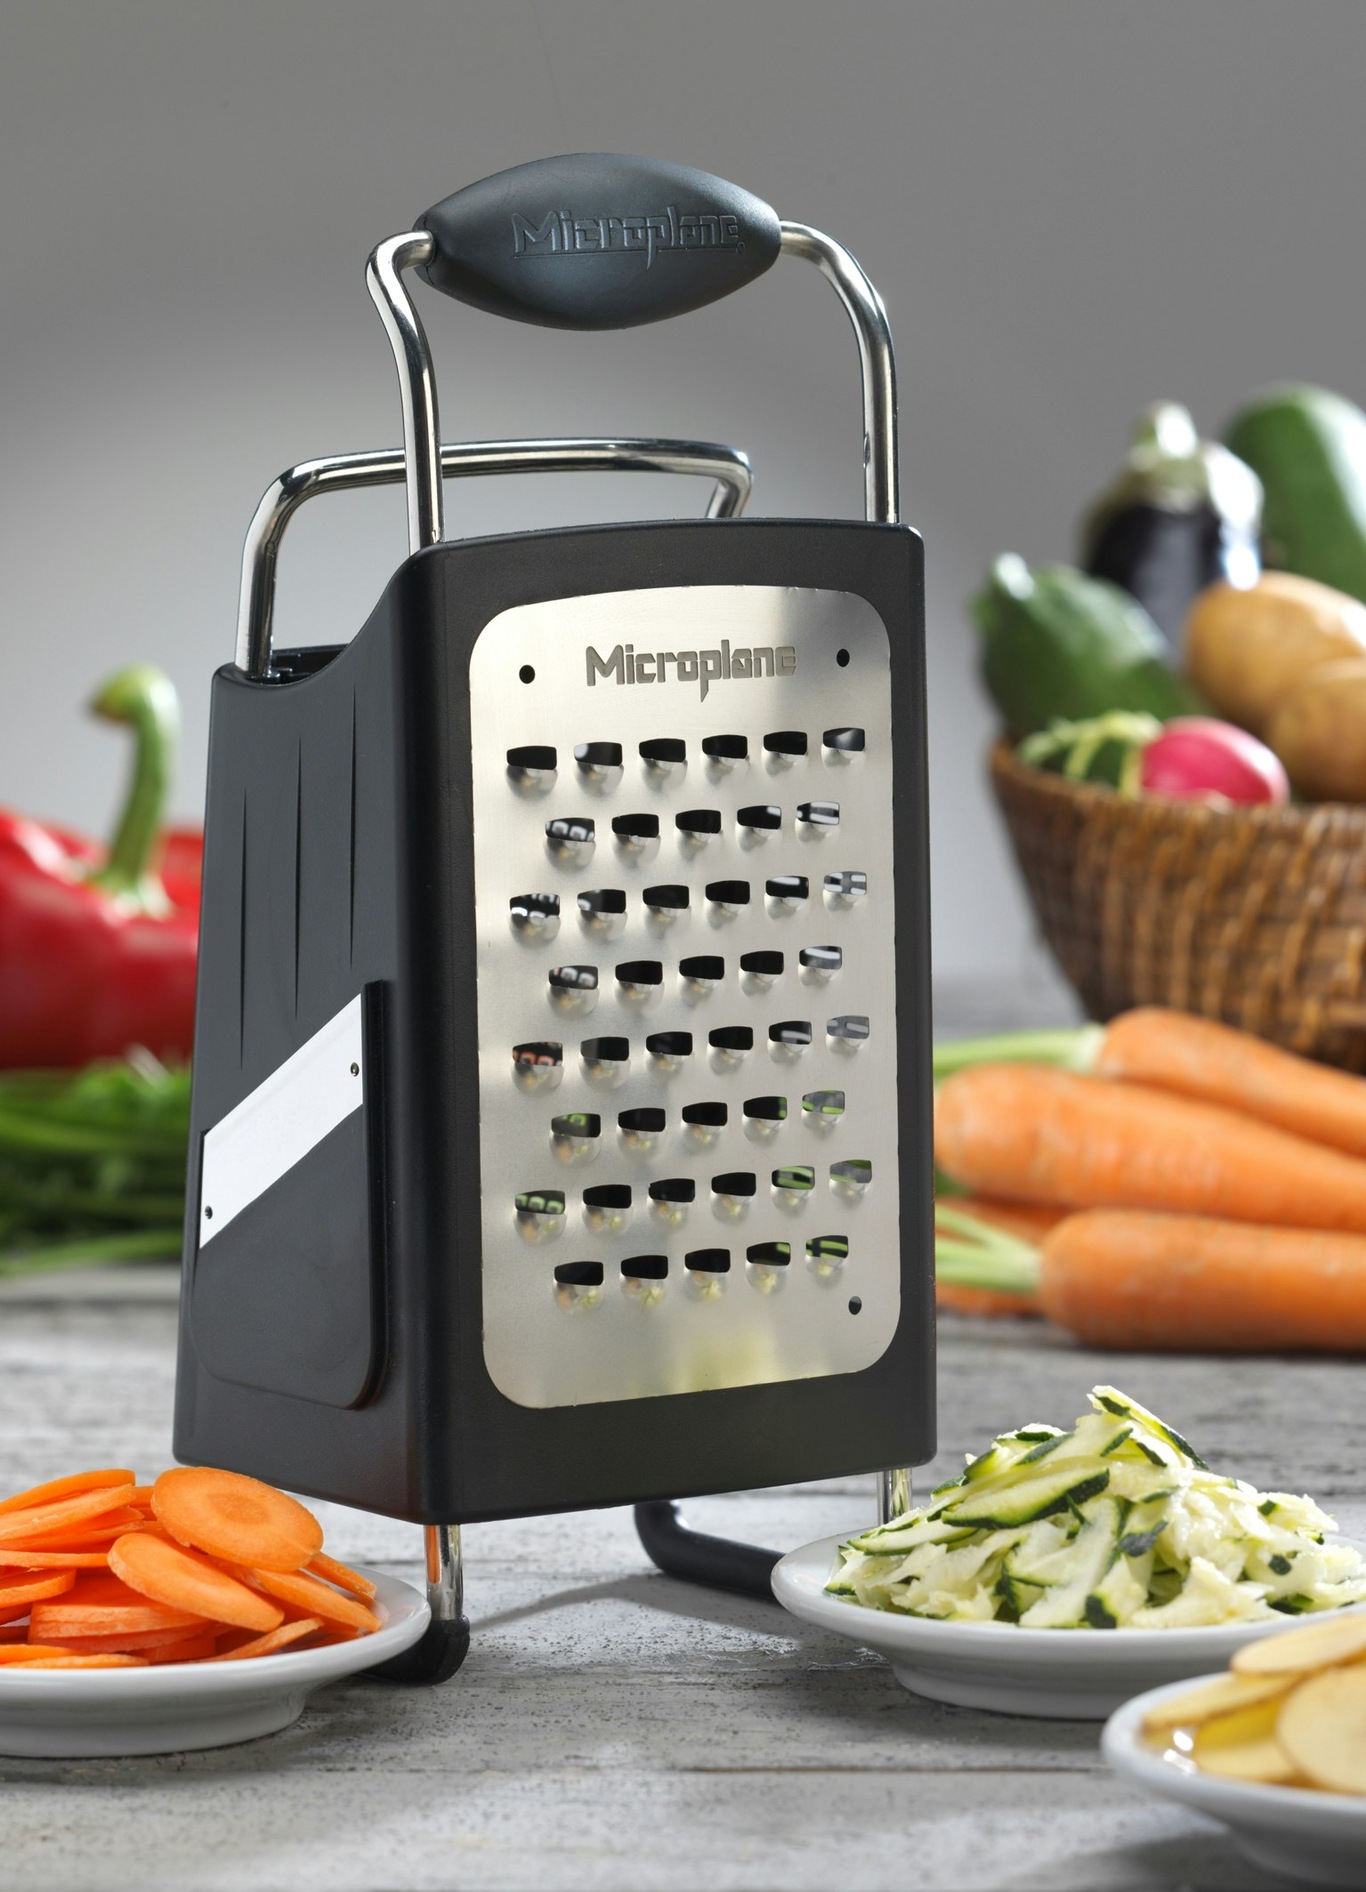 https://royaldesign.com/image/2/microplane-box-grater-with-4-sides-1?w=800&quality=80